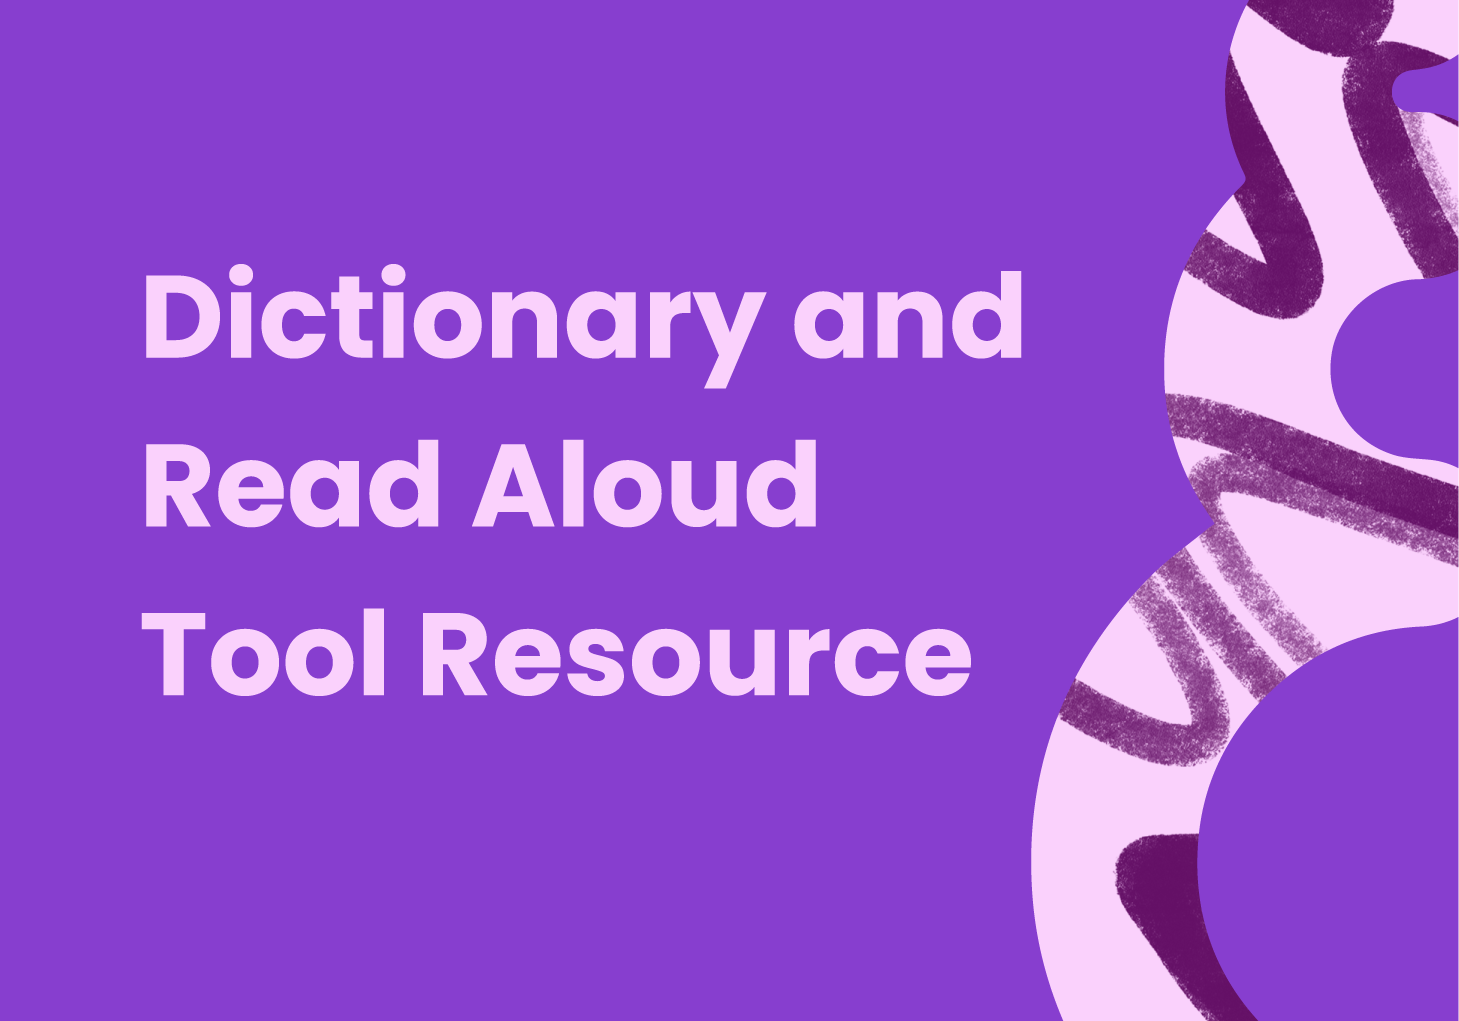 Dictionary and Read Aloud Tool Resources